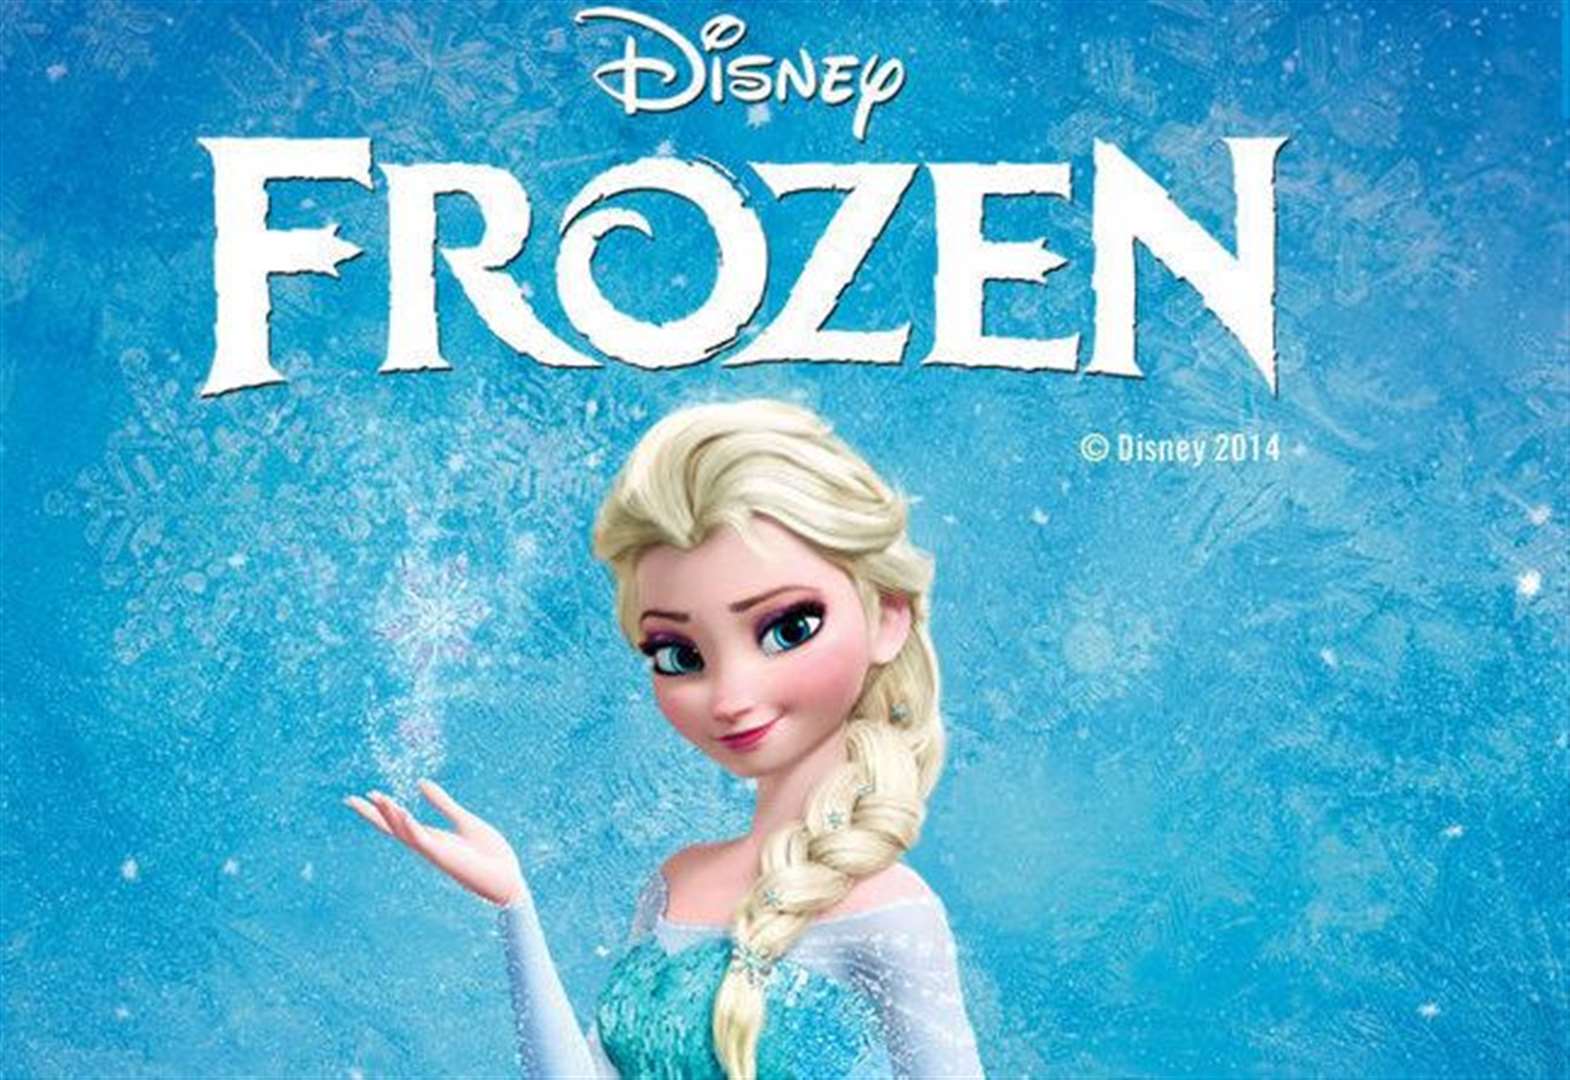 Disney's Frozen becomes latest London show to close over Covid 